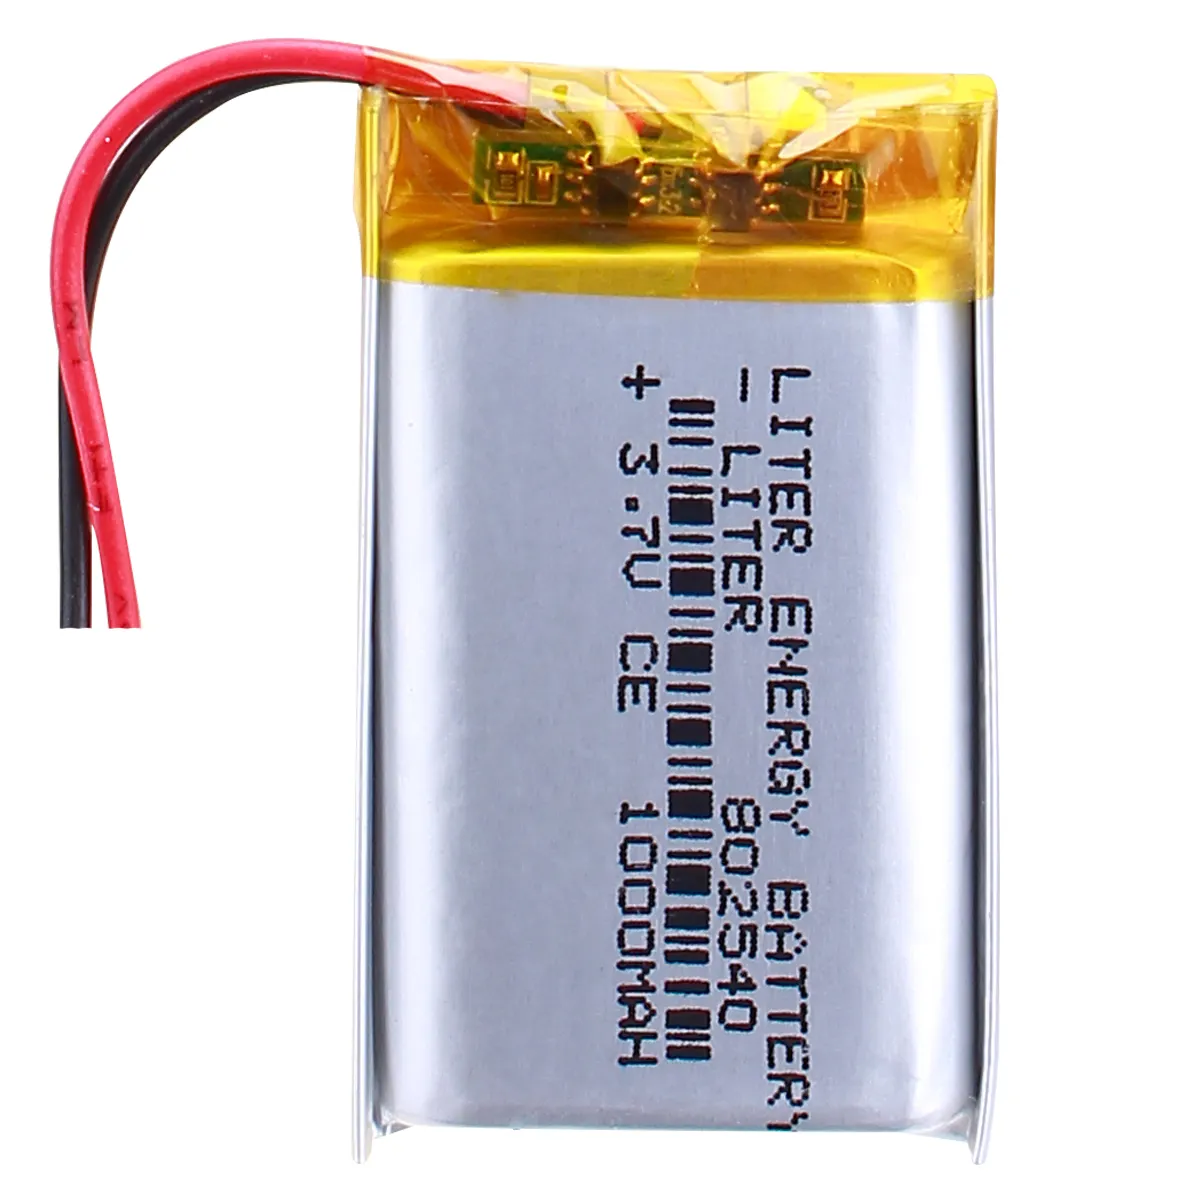 Polymer Lithium-ion Battery 3.7V 802540 1000mah Rechargeable Battery